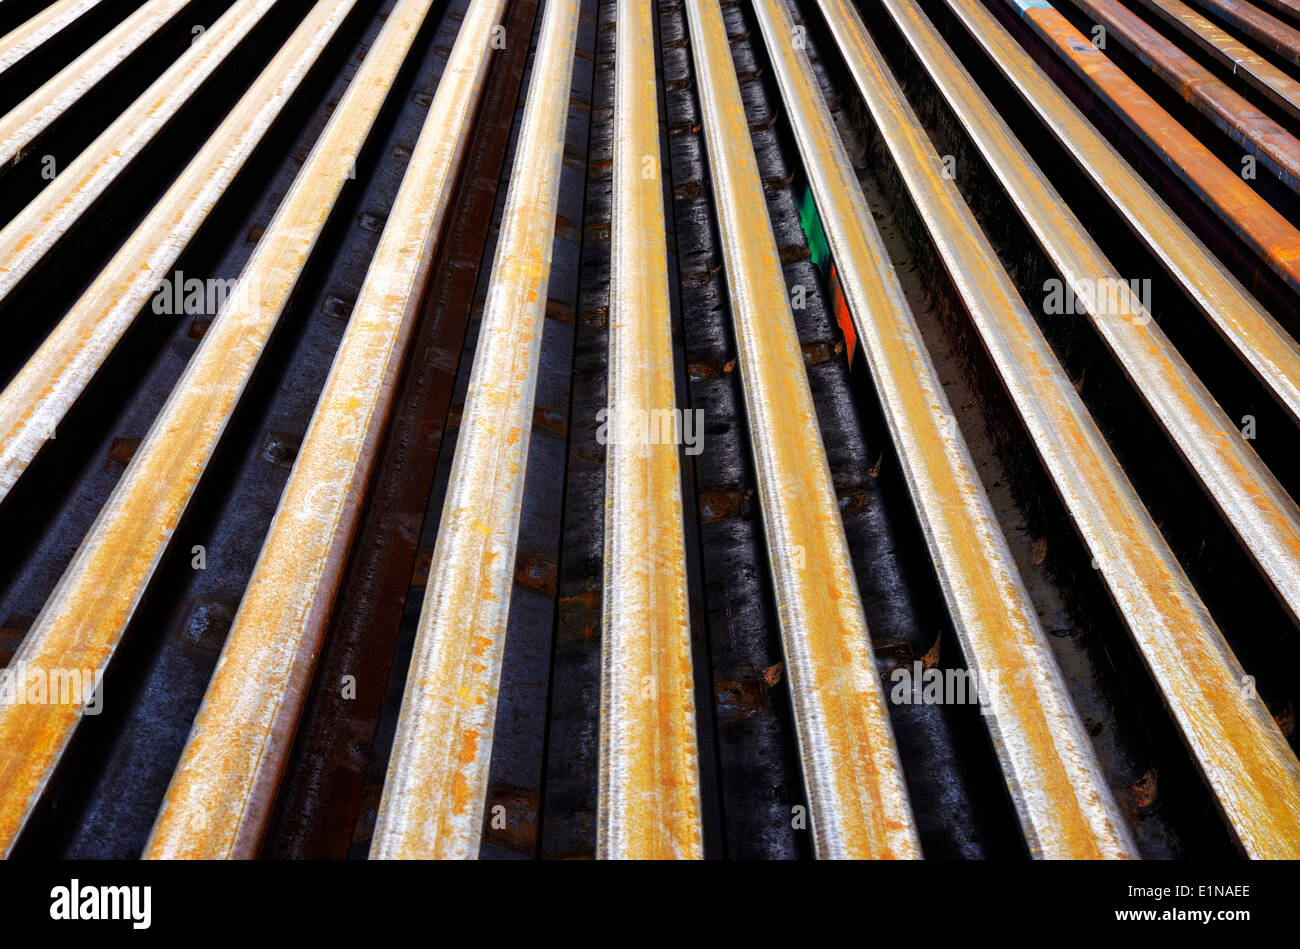 A close up image of a pile of steel rails to replace worn track rails on a Canadian National railway line. Stock Photo